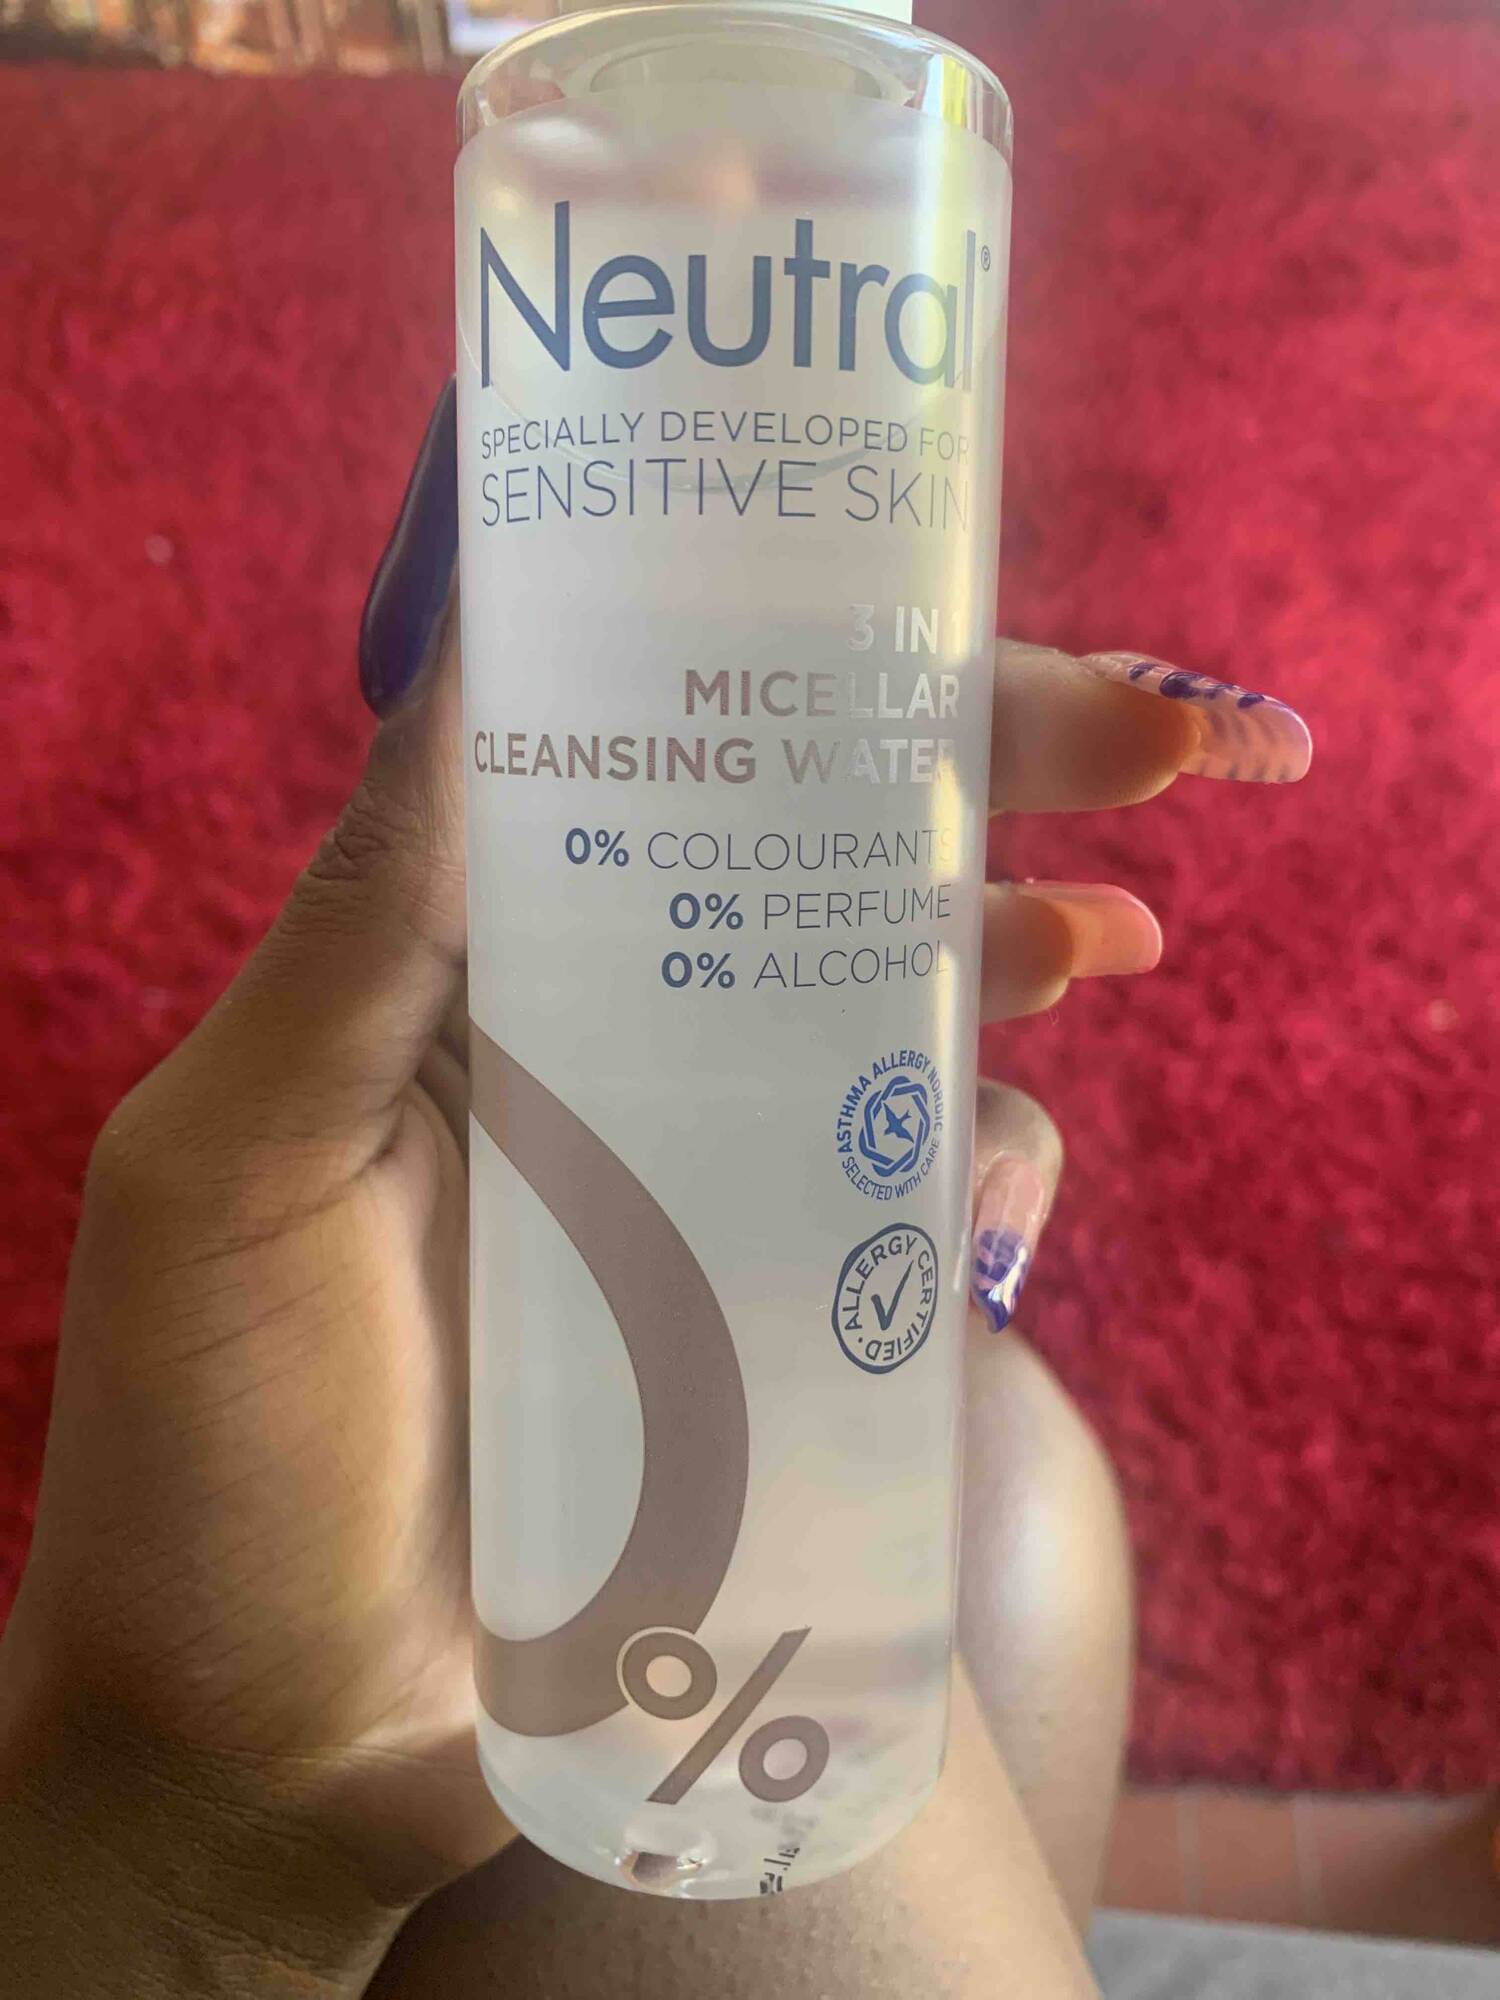 NEUTRAL - 3 in 1 micellar cleansing water